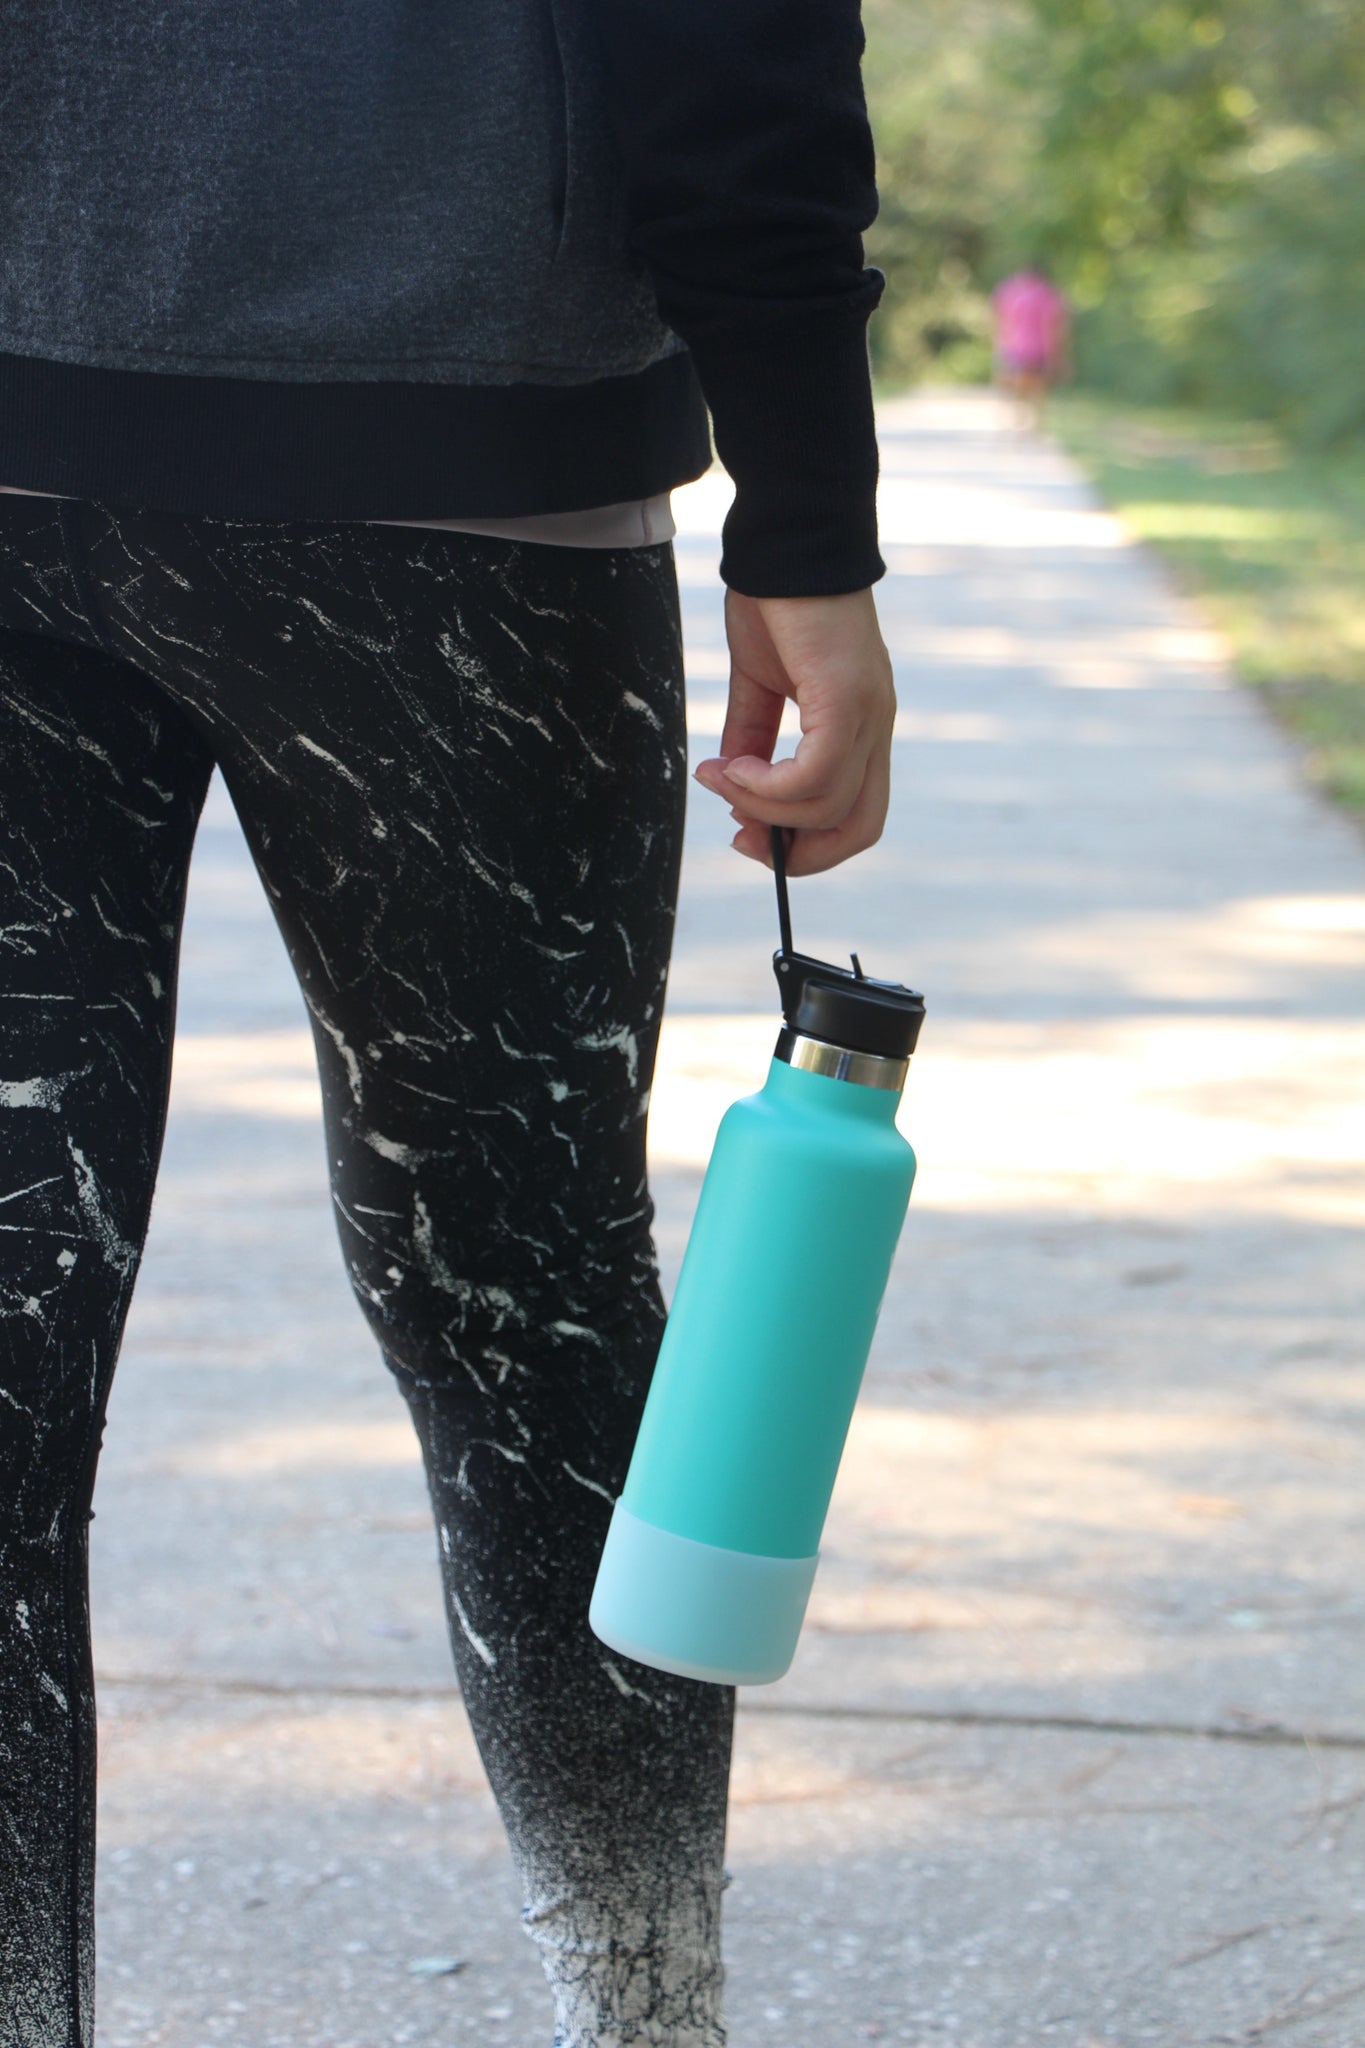 Hydro Flask 24-Ounce Water Bottle with Straw Lid